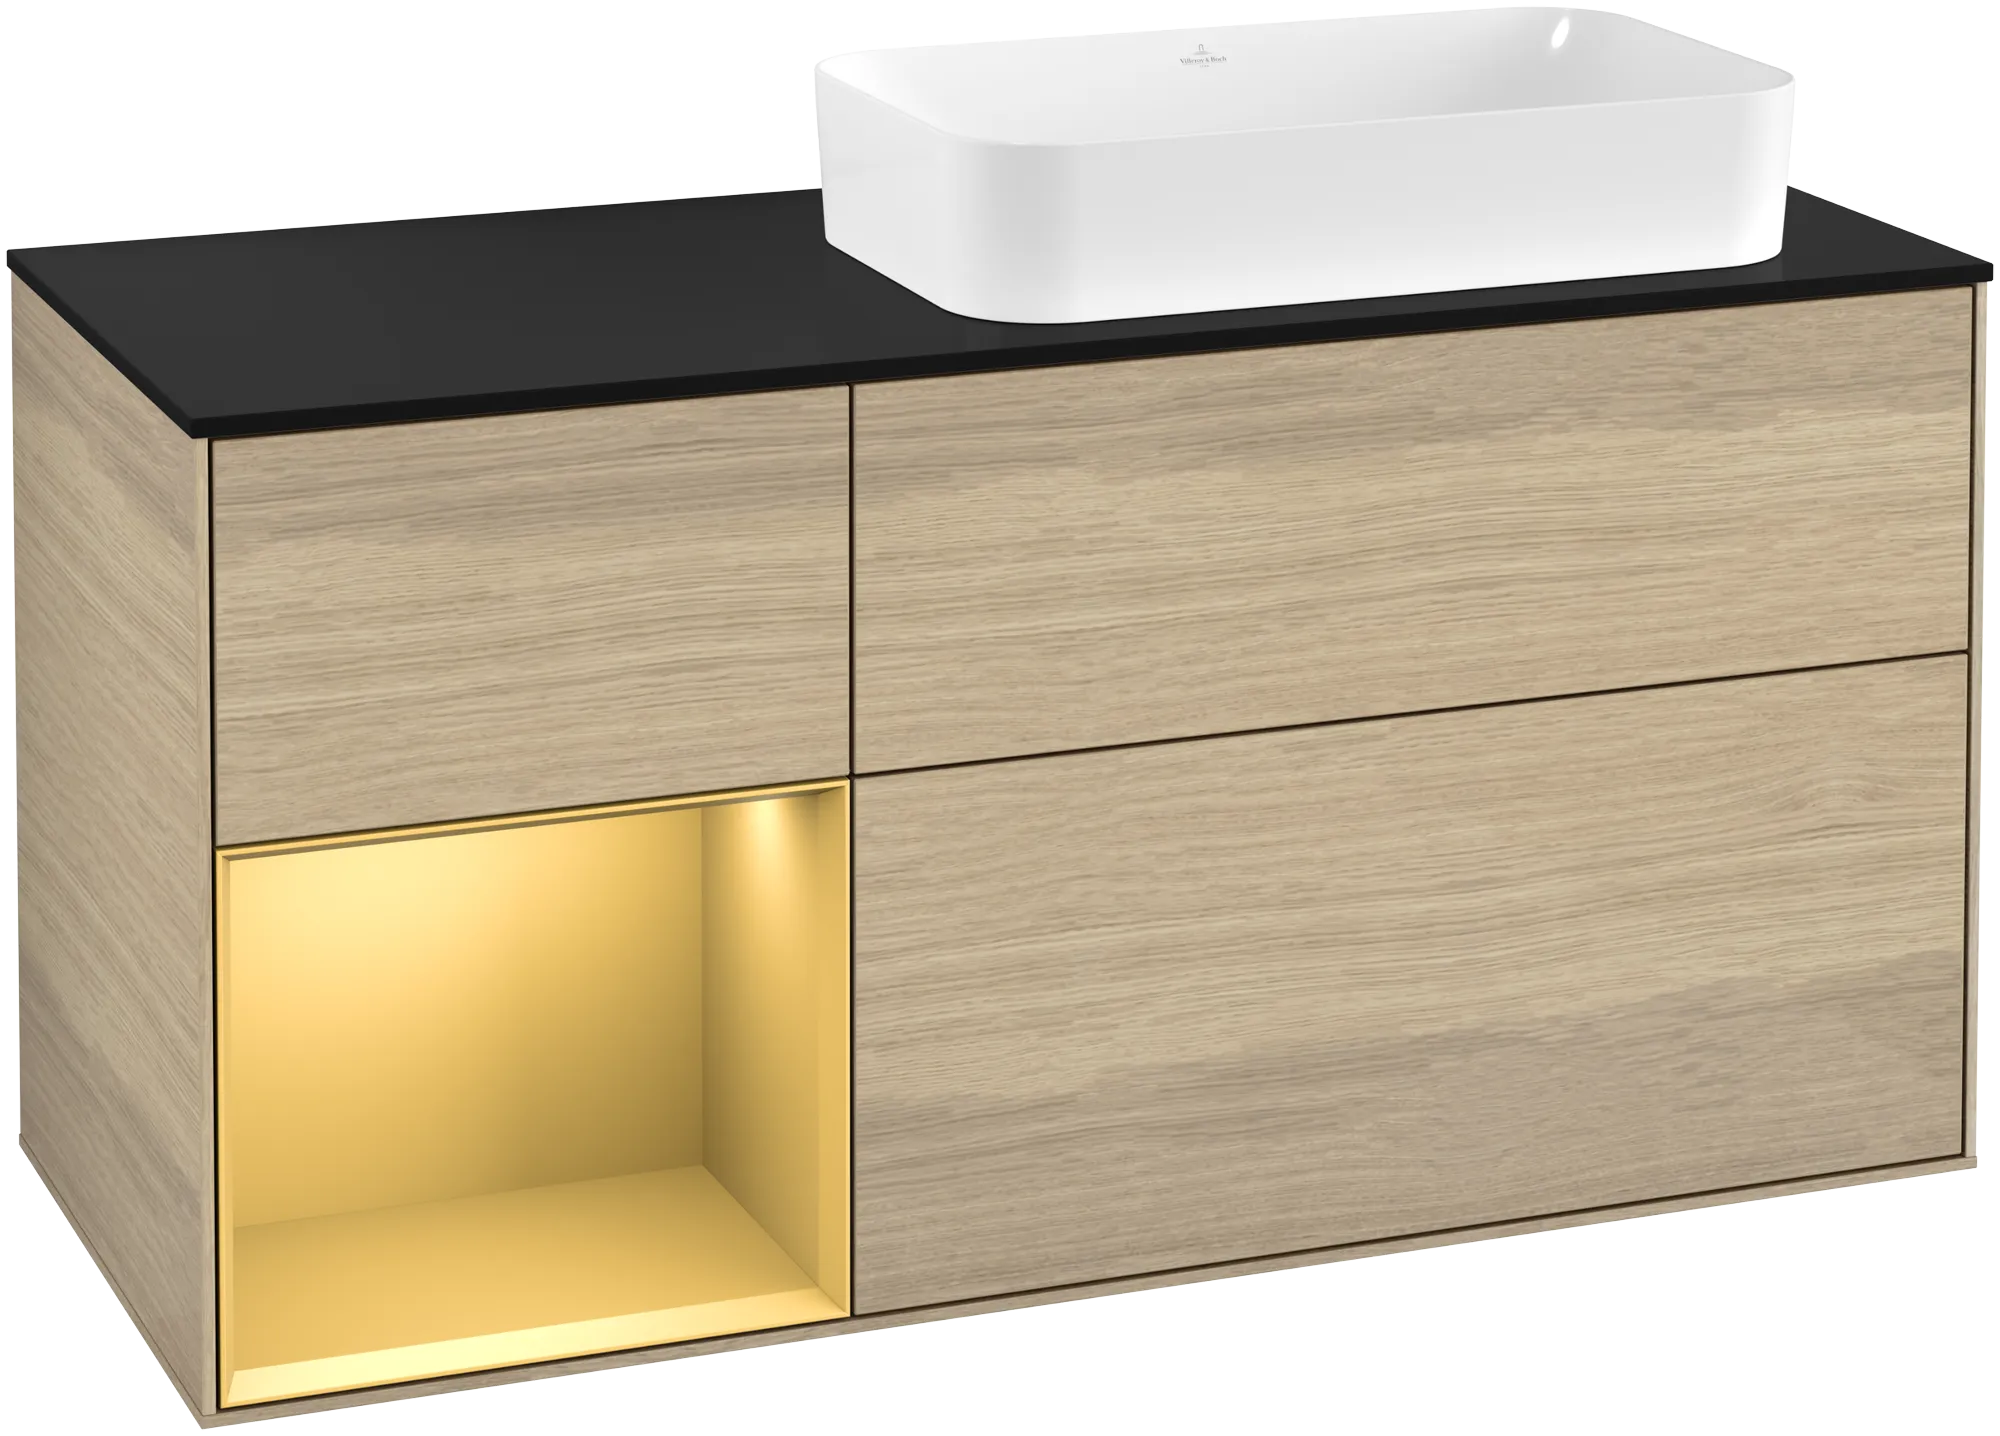 Picture of VILLEROY BOCH Finion Vanity unit, with lighting, 3 pull-out compartments, 1200 x 603 x 501 mm, Oak Veneer / Gold Matt Lacquer / Glass Black Matt #G272HFPC